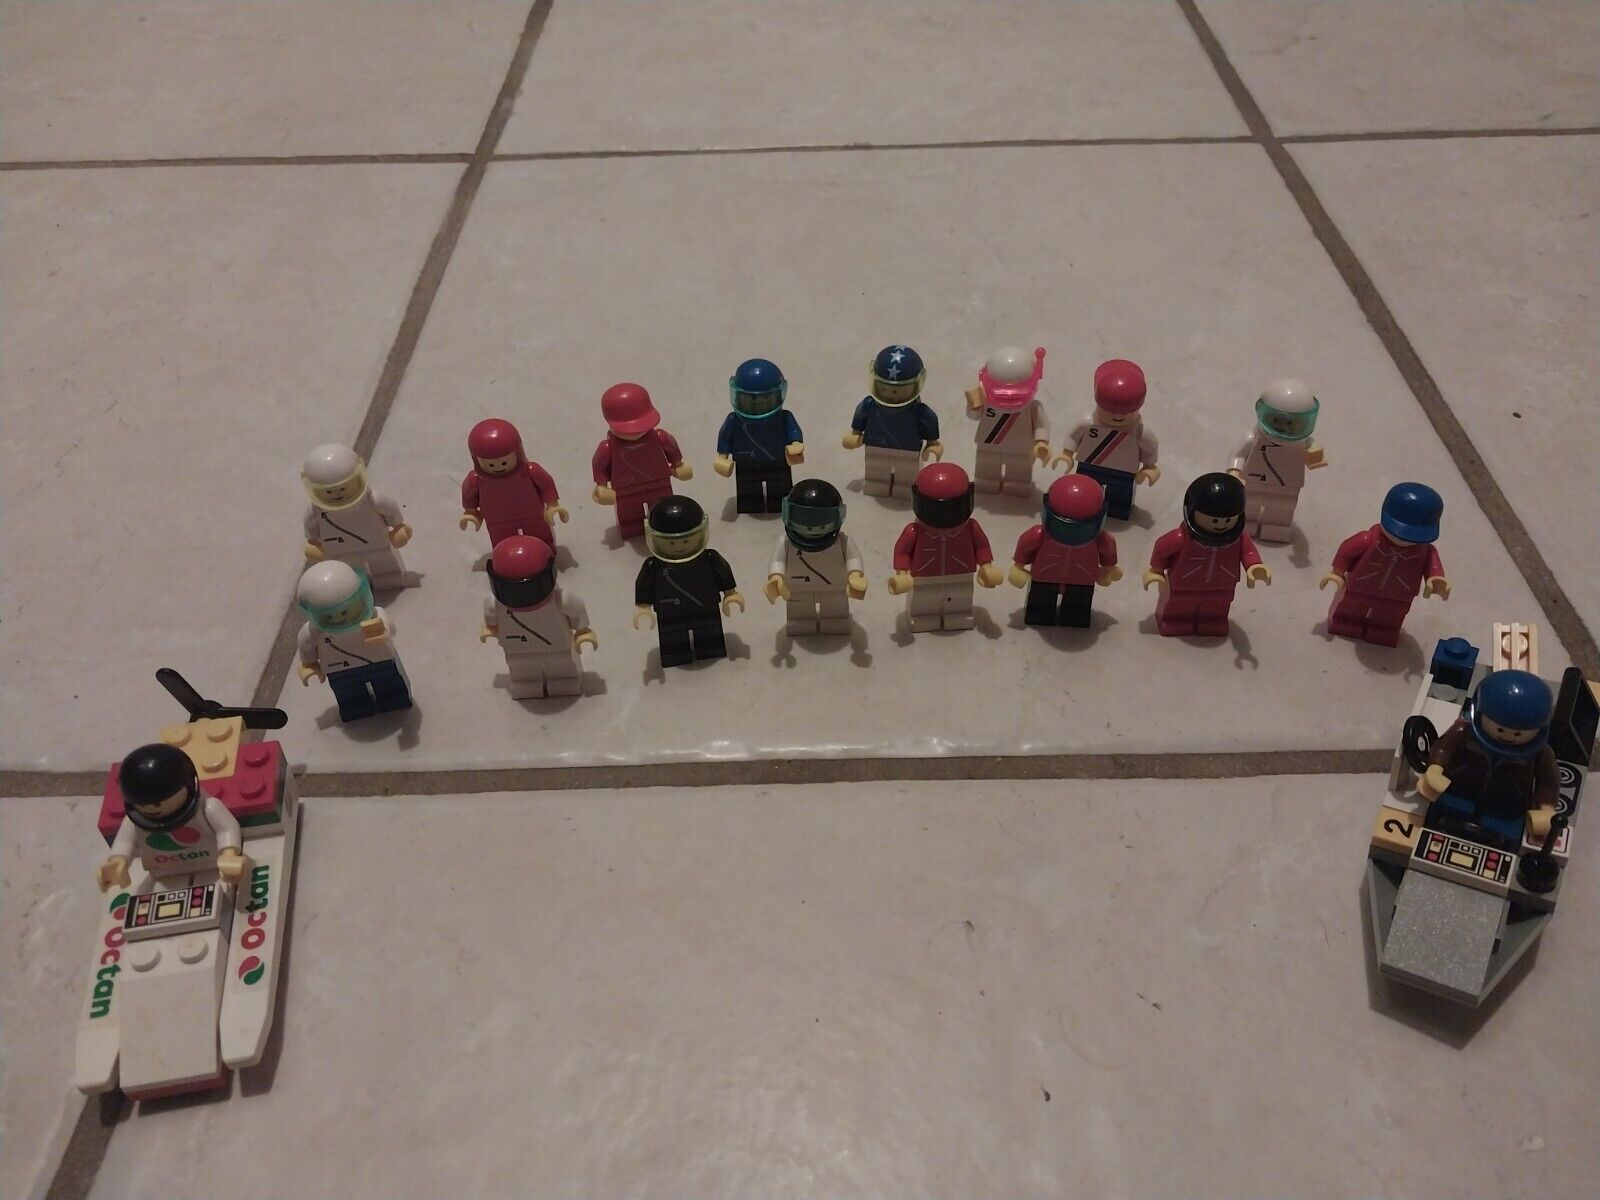 Lego Race Car Drivers 18 Minifigures Lot and Accessories All Have Helmets 2 Hats